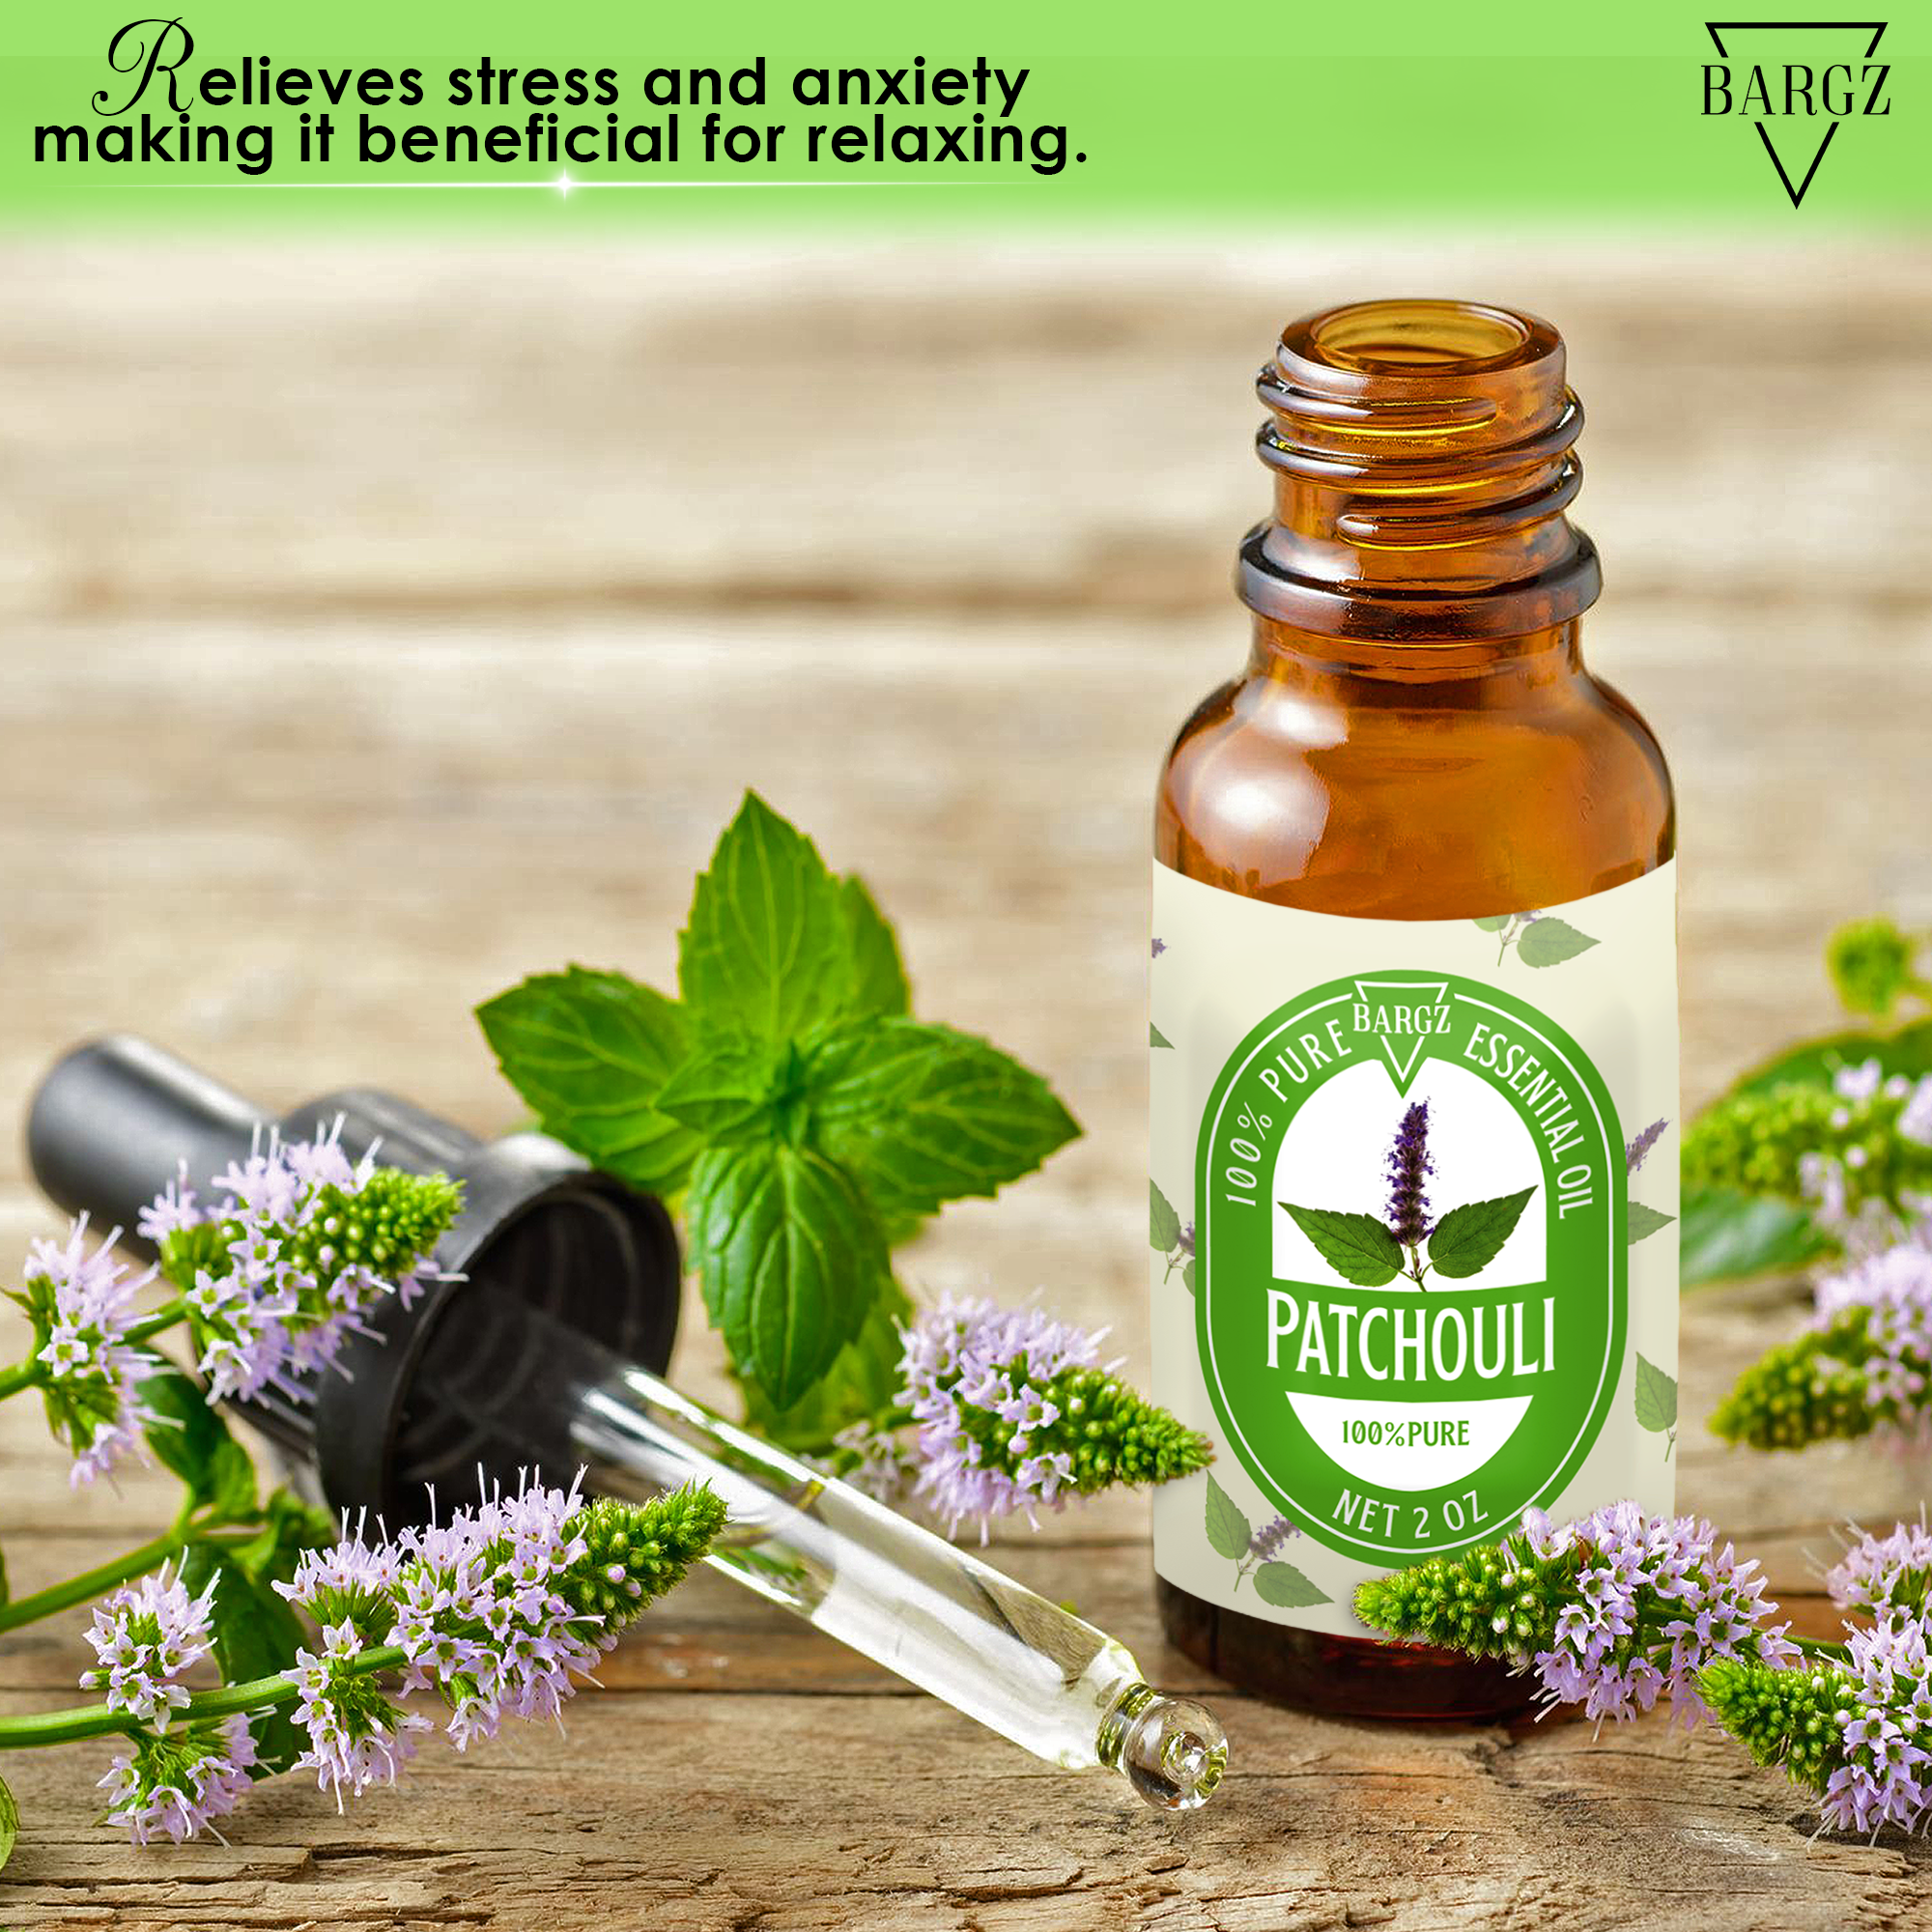 Benefits of using Patchouli Essential Oil